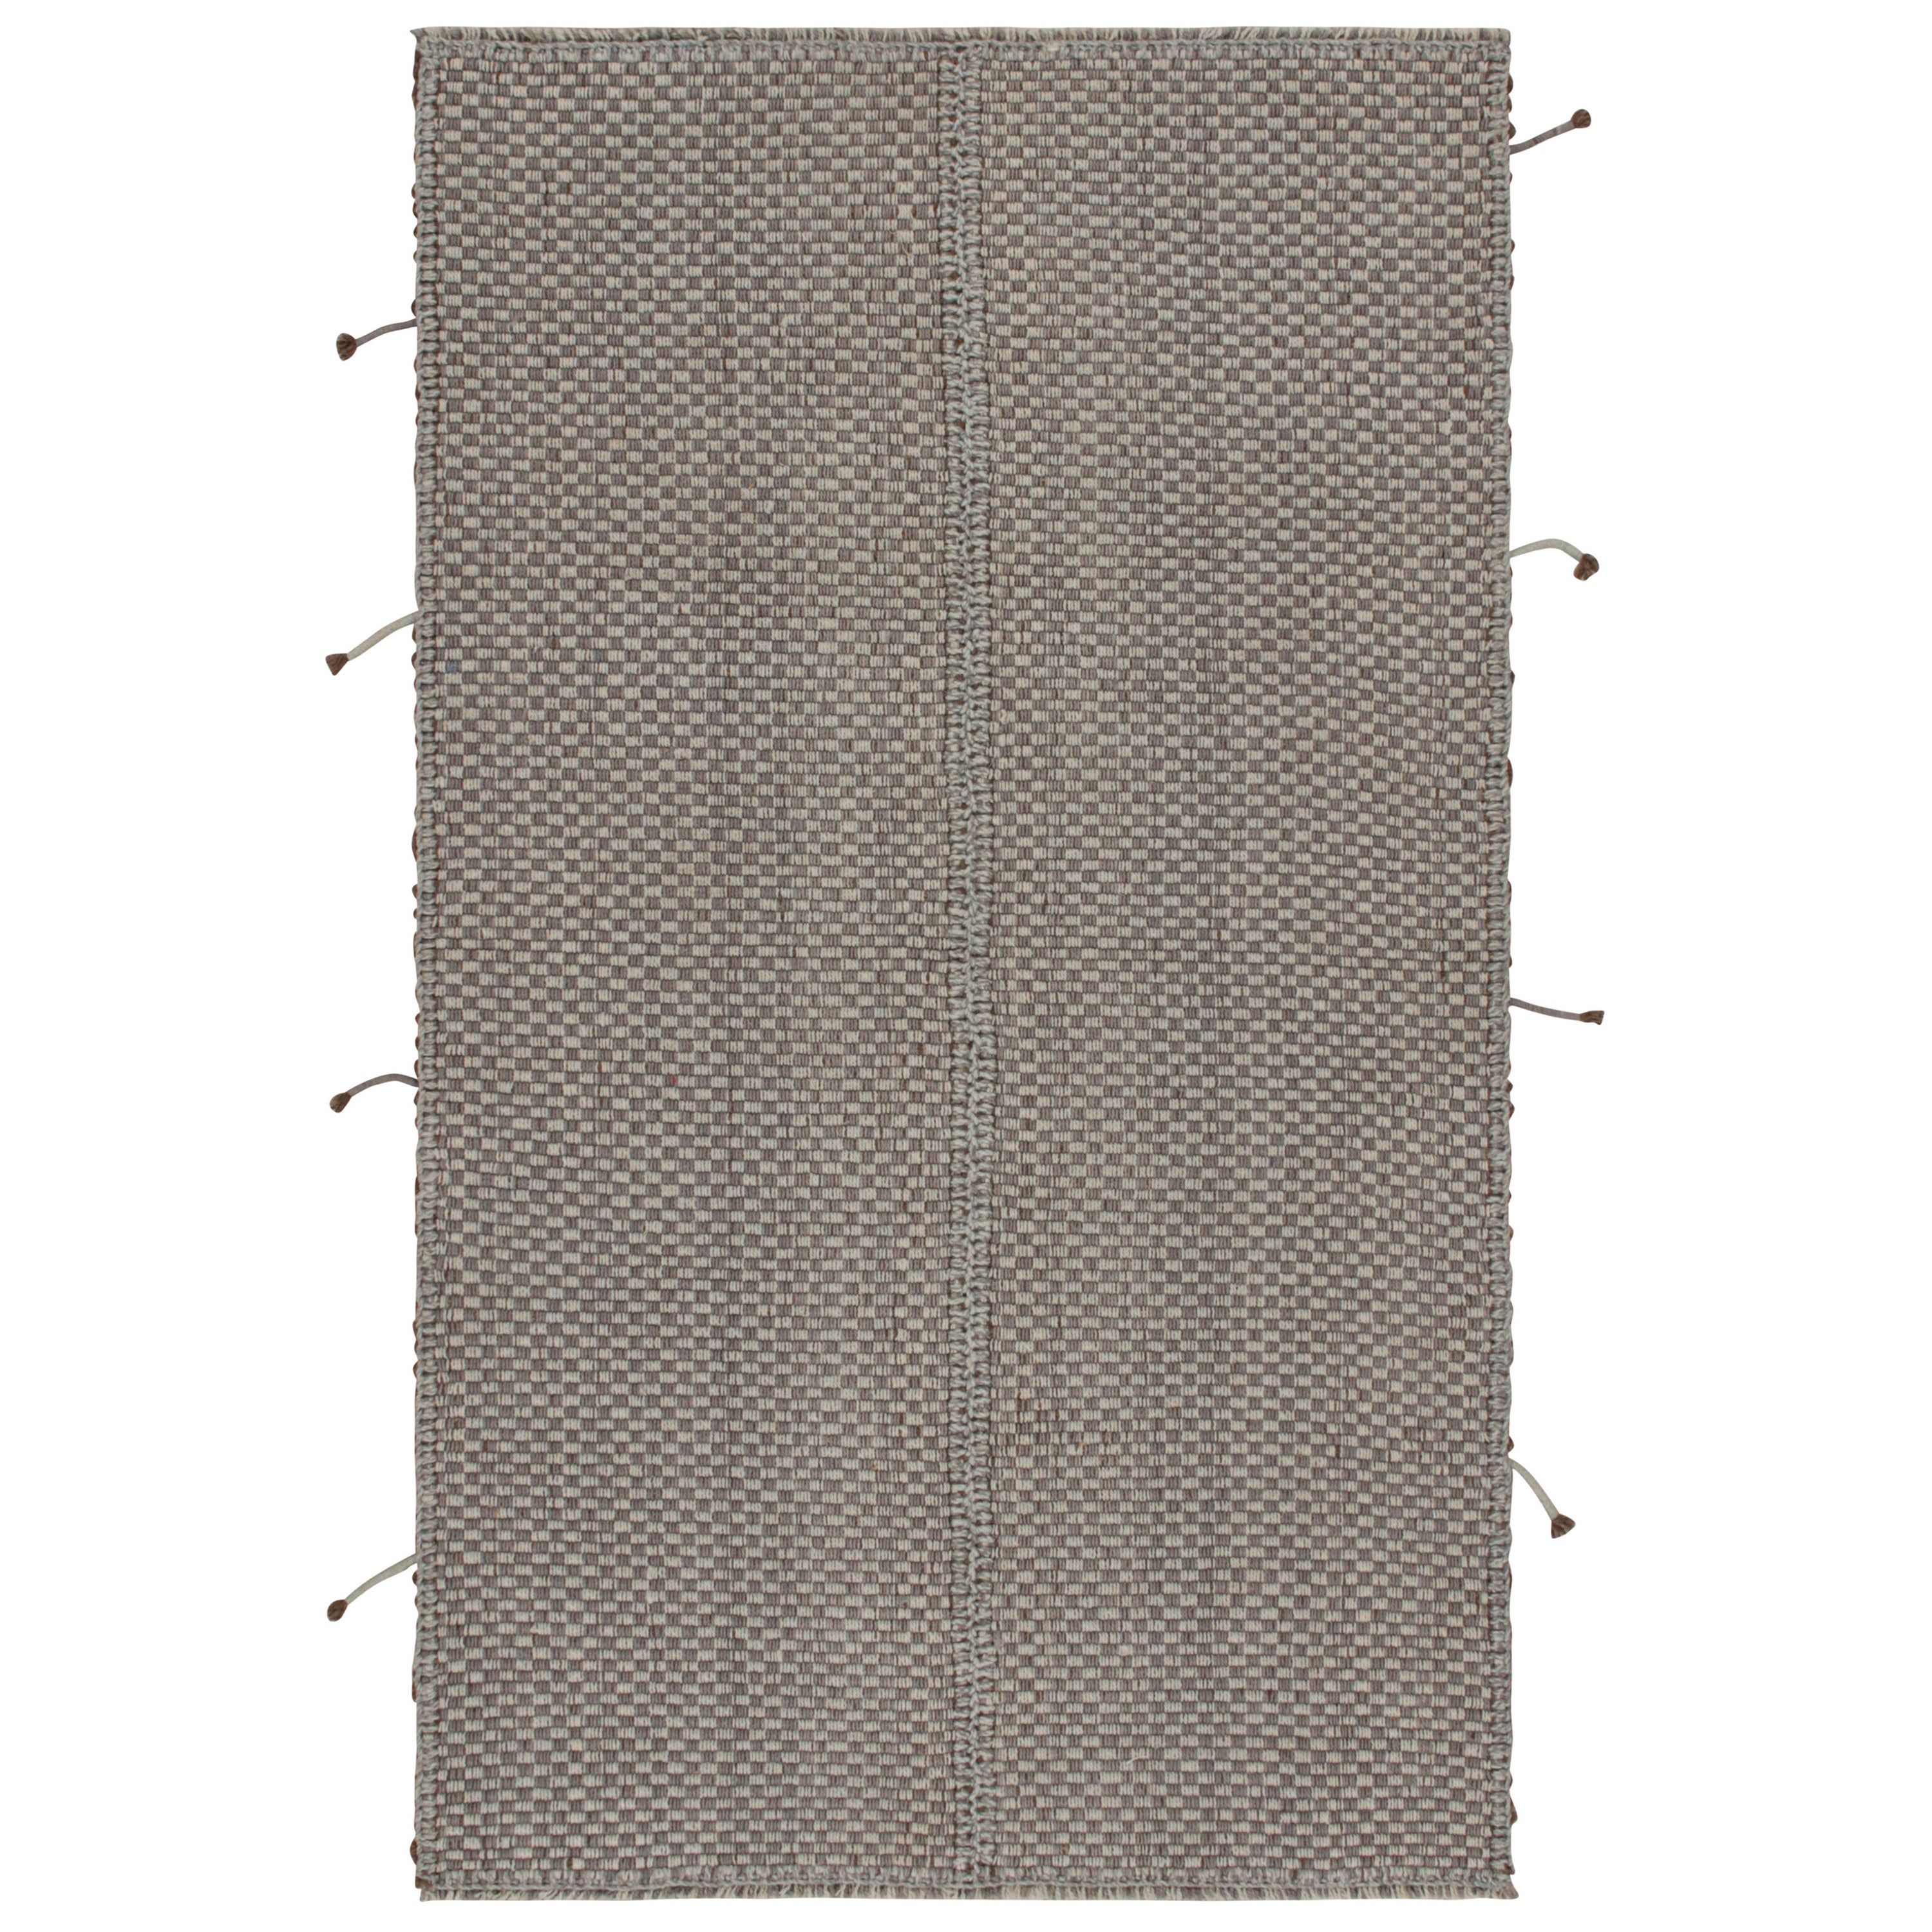 Rug & Kilim’s Contemporary Kilim in Gray with Blue and Brown Accents 